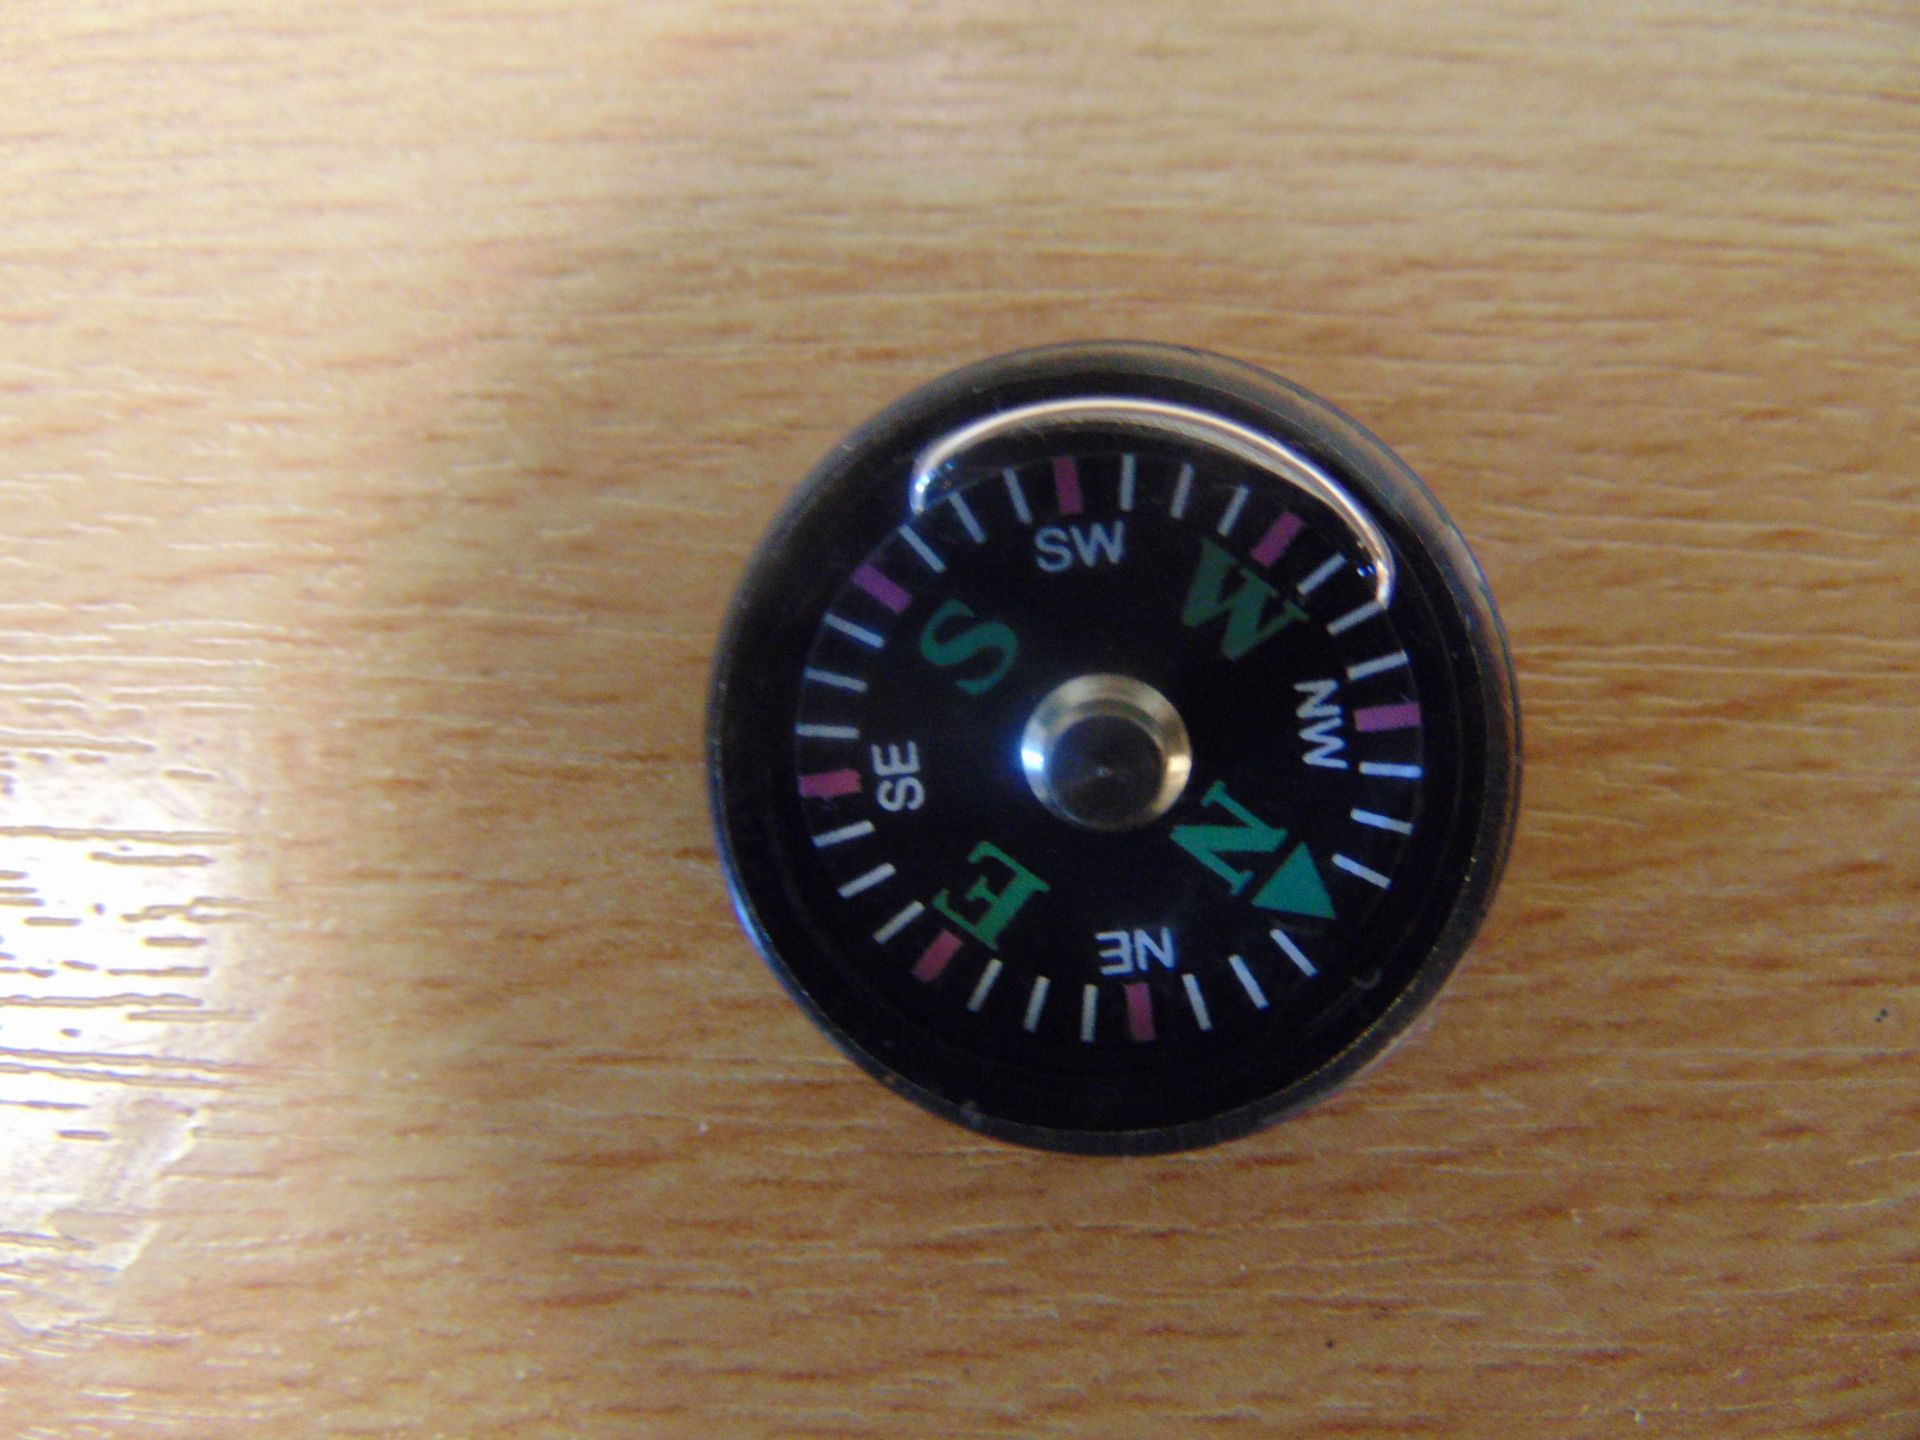 New Unissued RAF Survival Compass